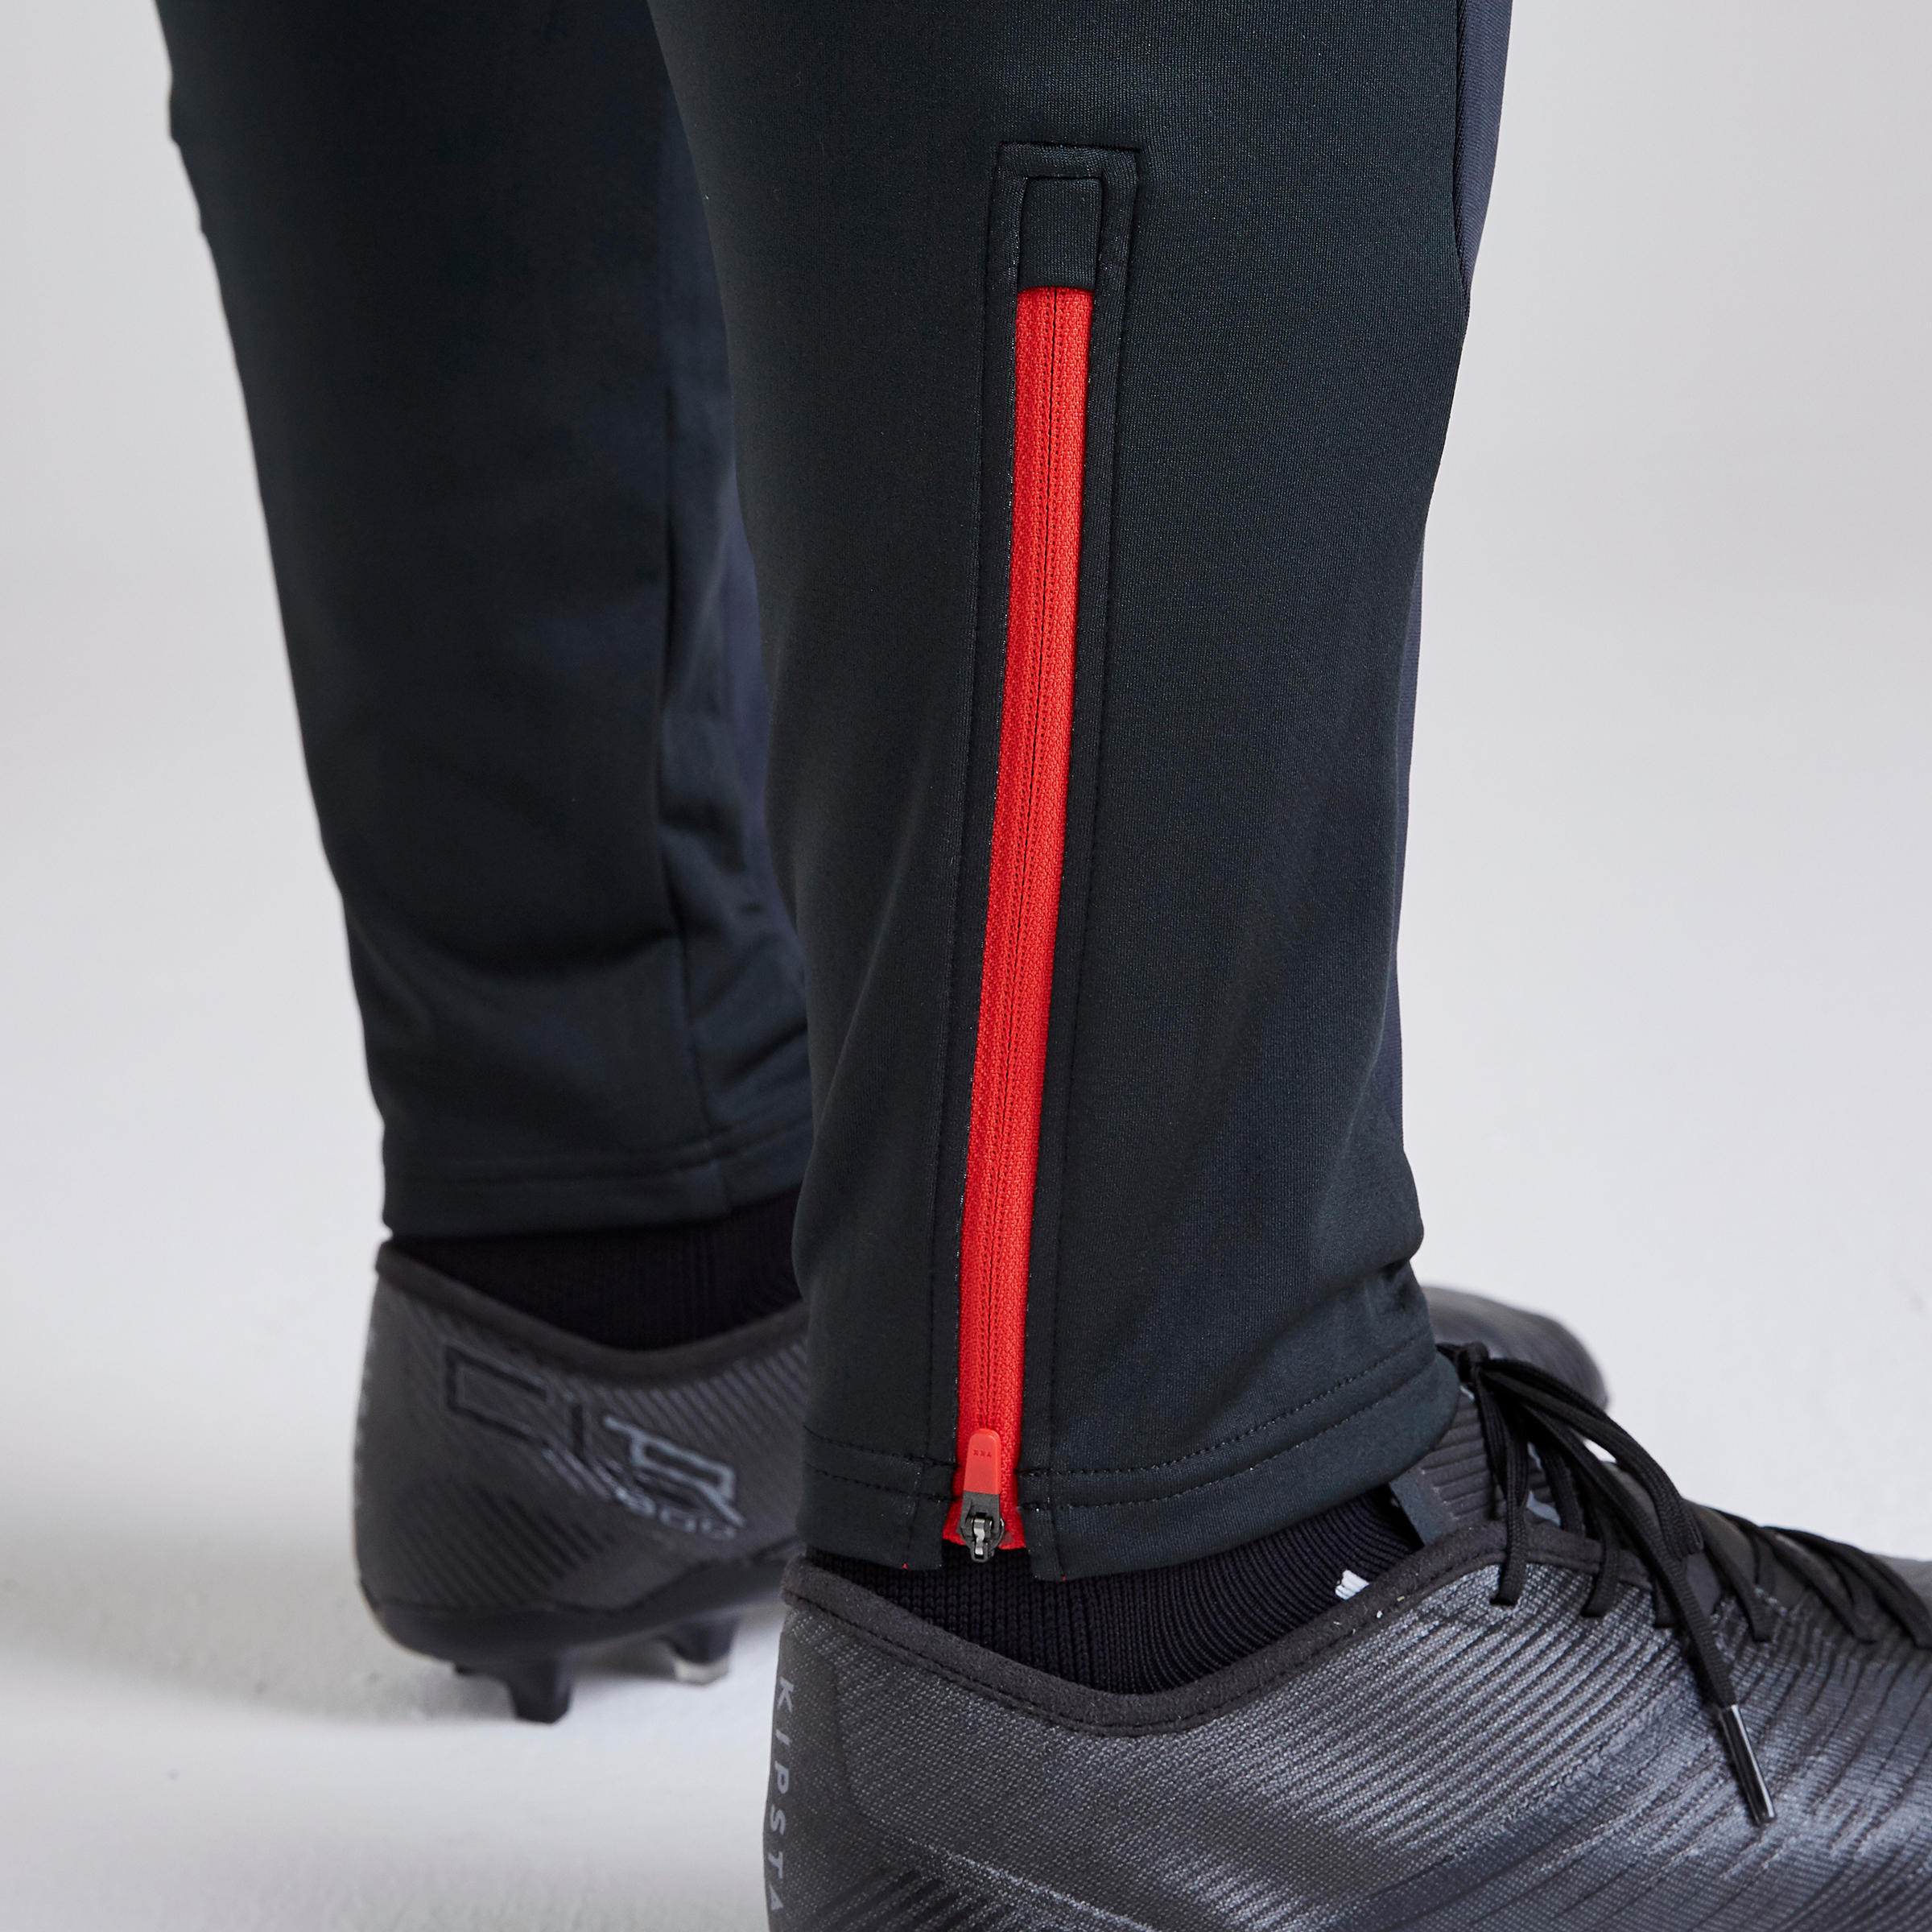 Adult Football Bottoms T500 - Carbon Grey/Red 4/7